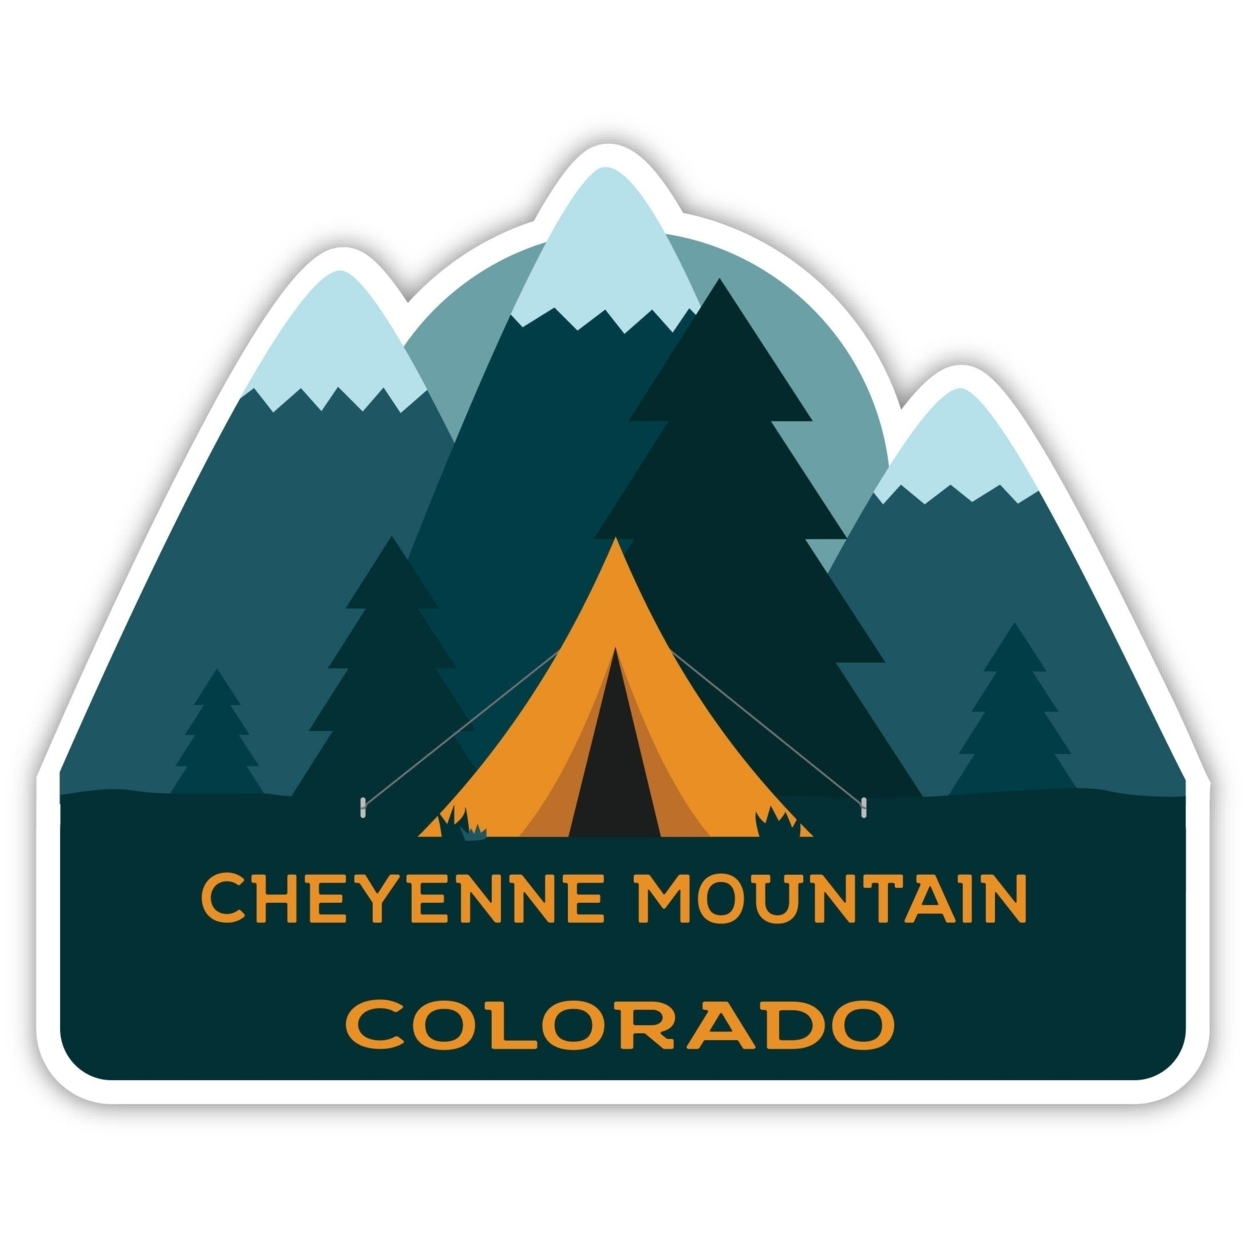 Cheyenne Mountain Colorado Souvenir Decorative Stickers (Choose Theme And Size) - 4-Pack, 12-Inch, Tent